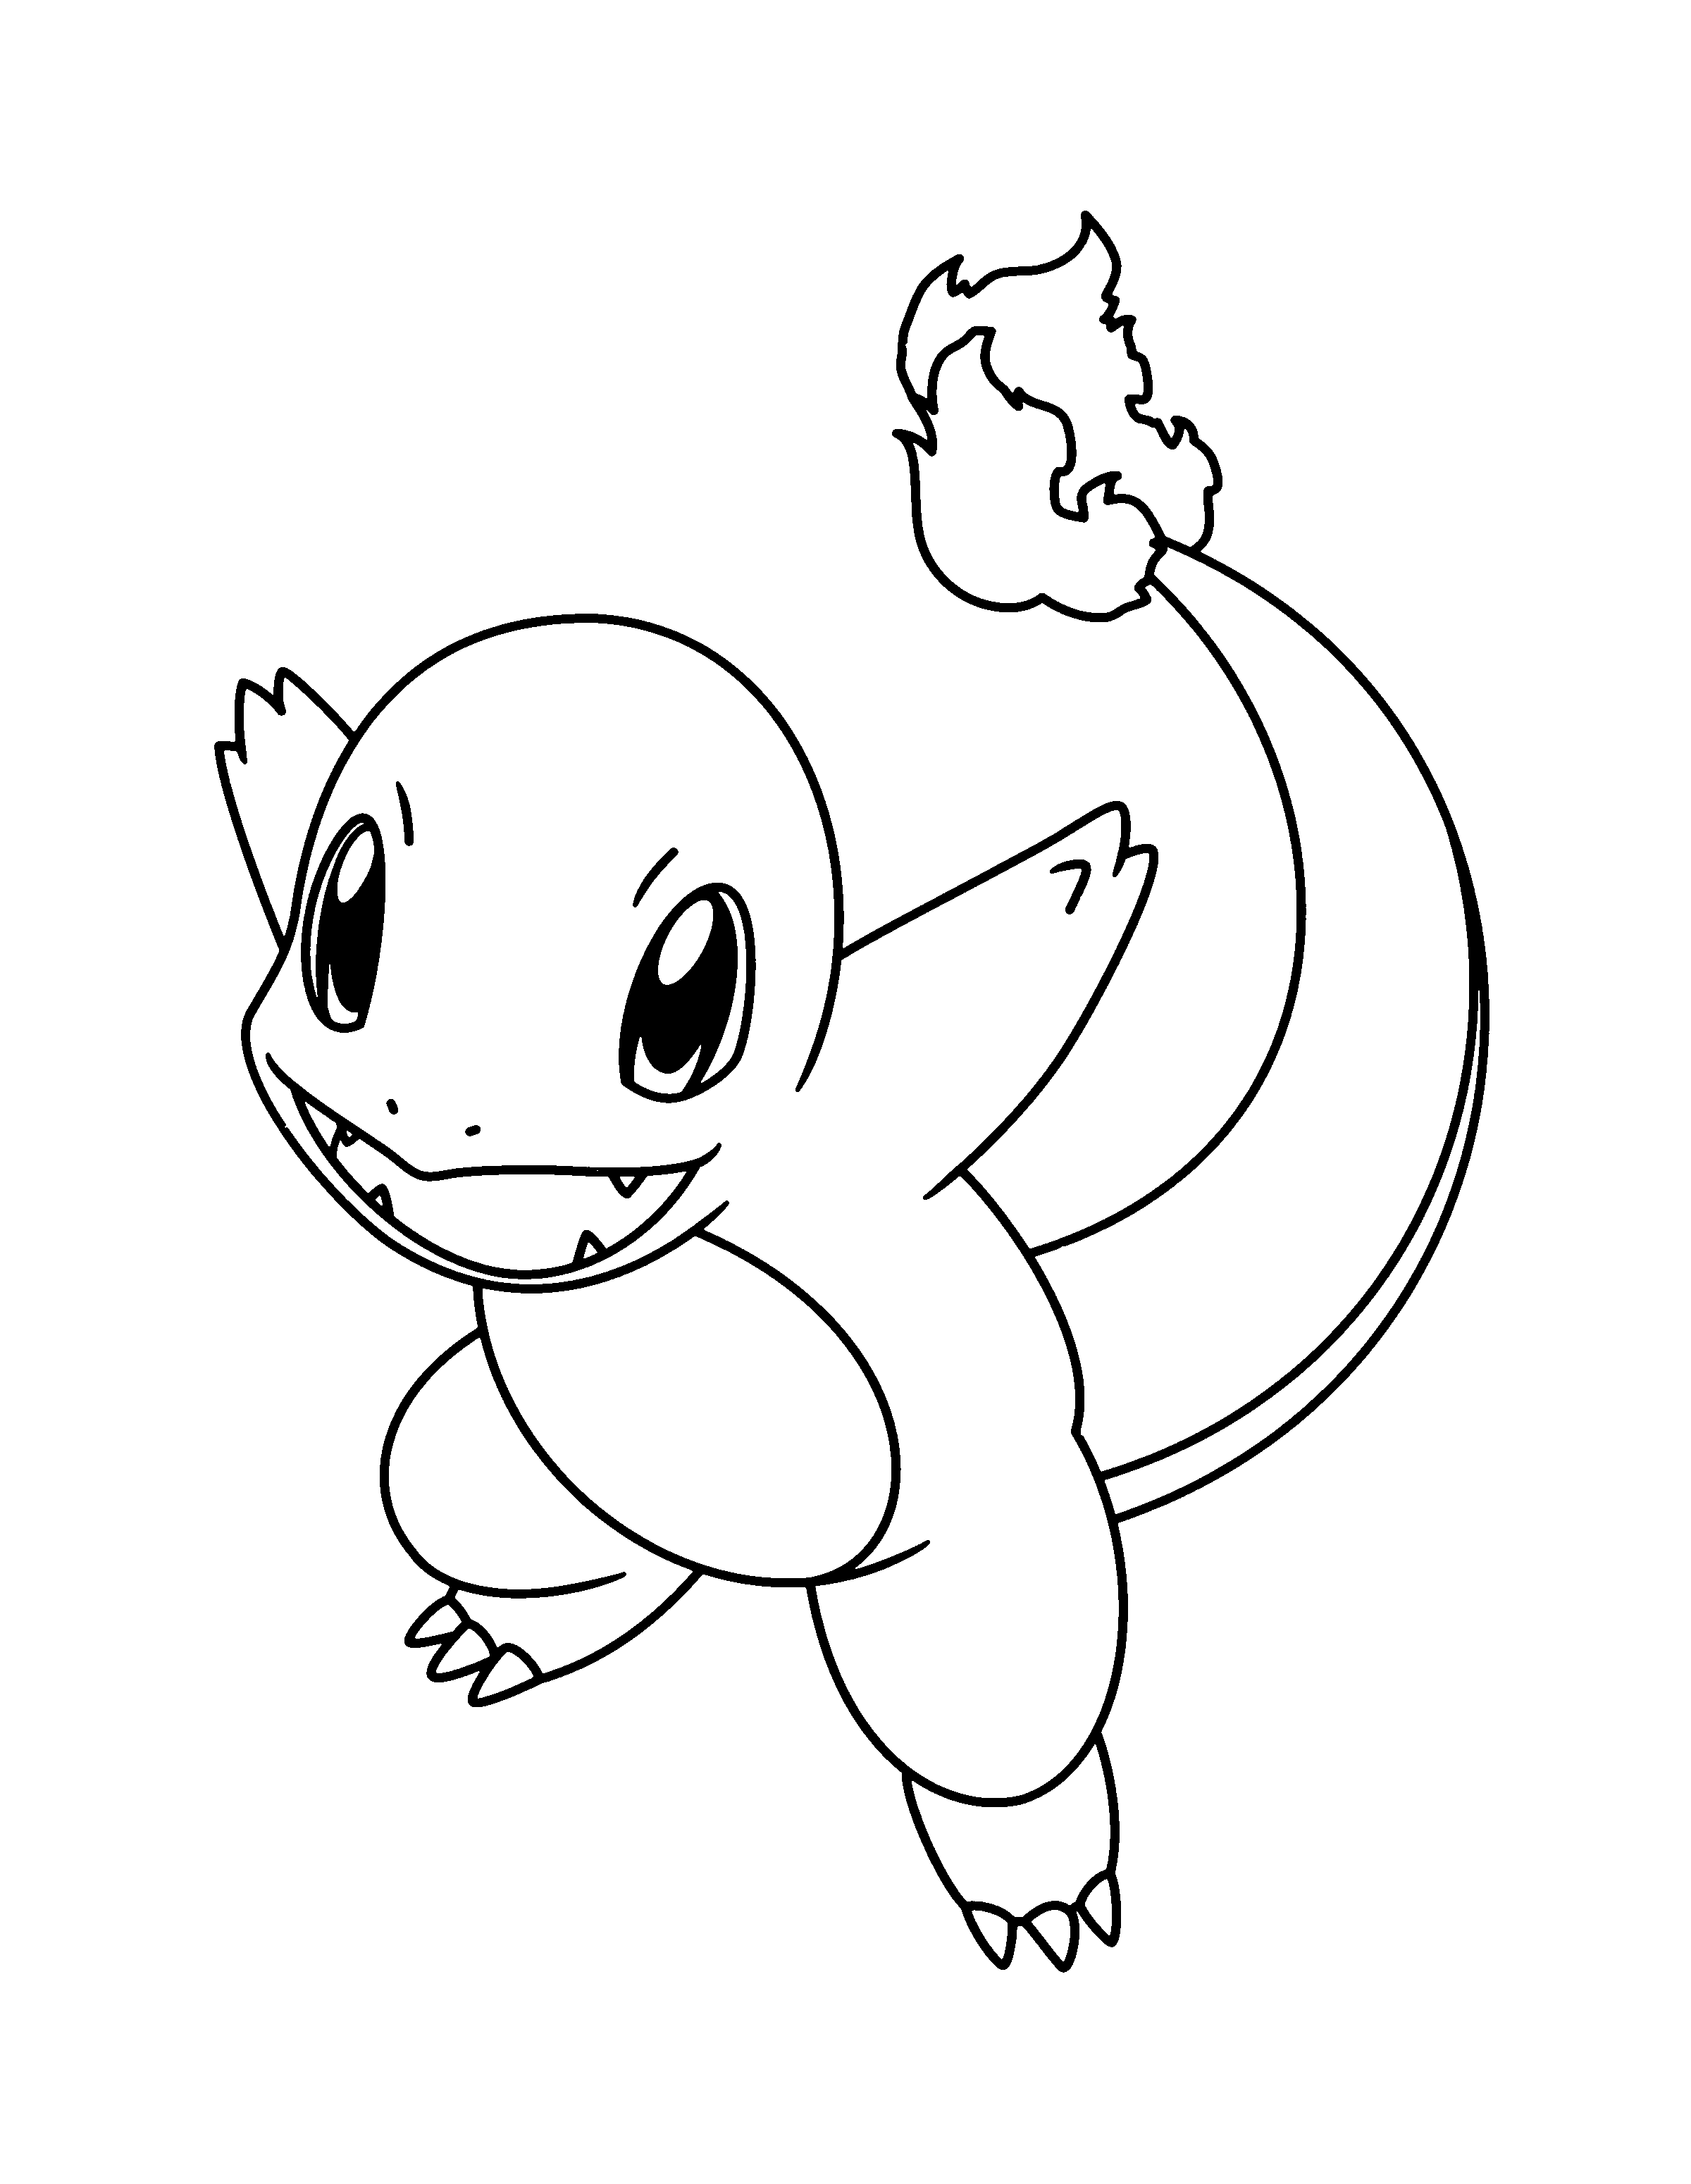 Coloring Page Pokemon Advanced Coloring Pages 141 Pokemon Coloring Sheets Pokemon Col